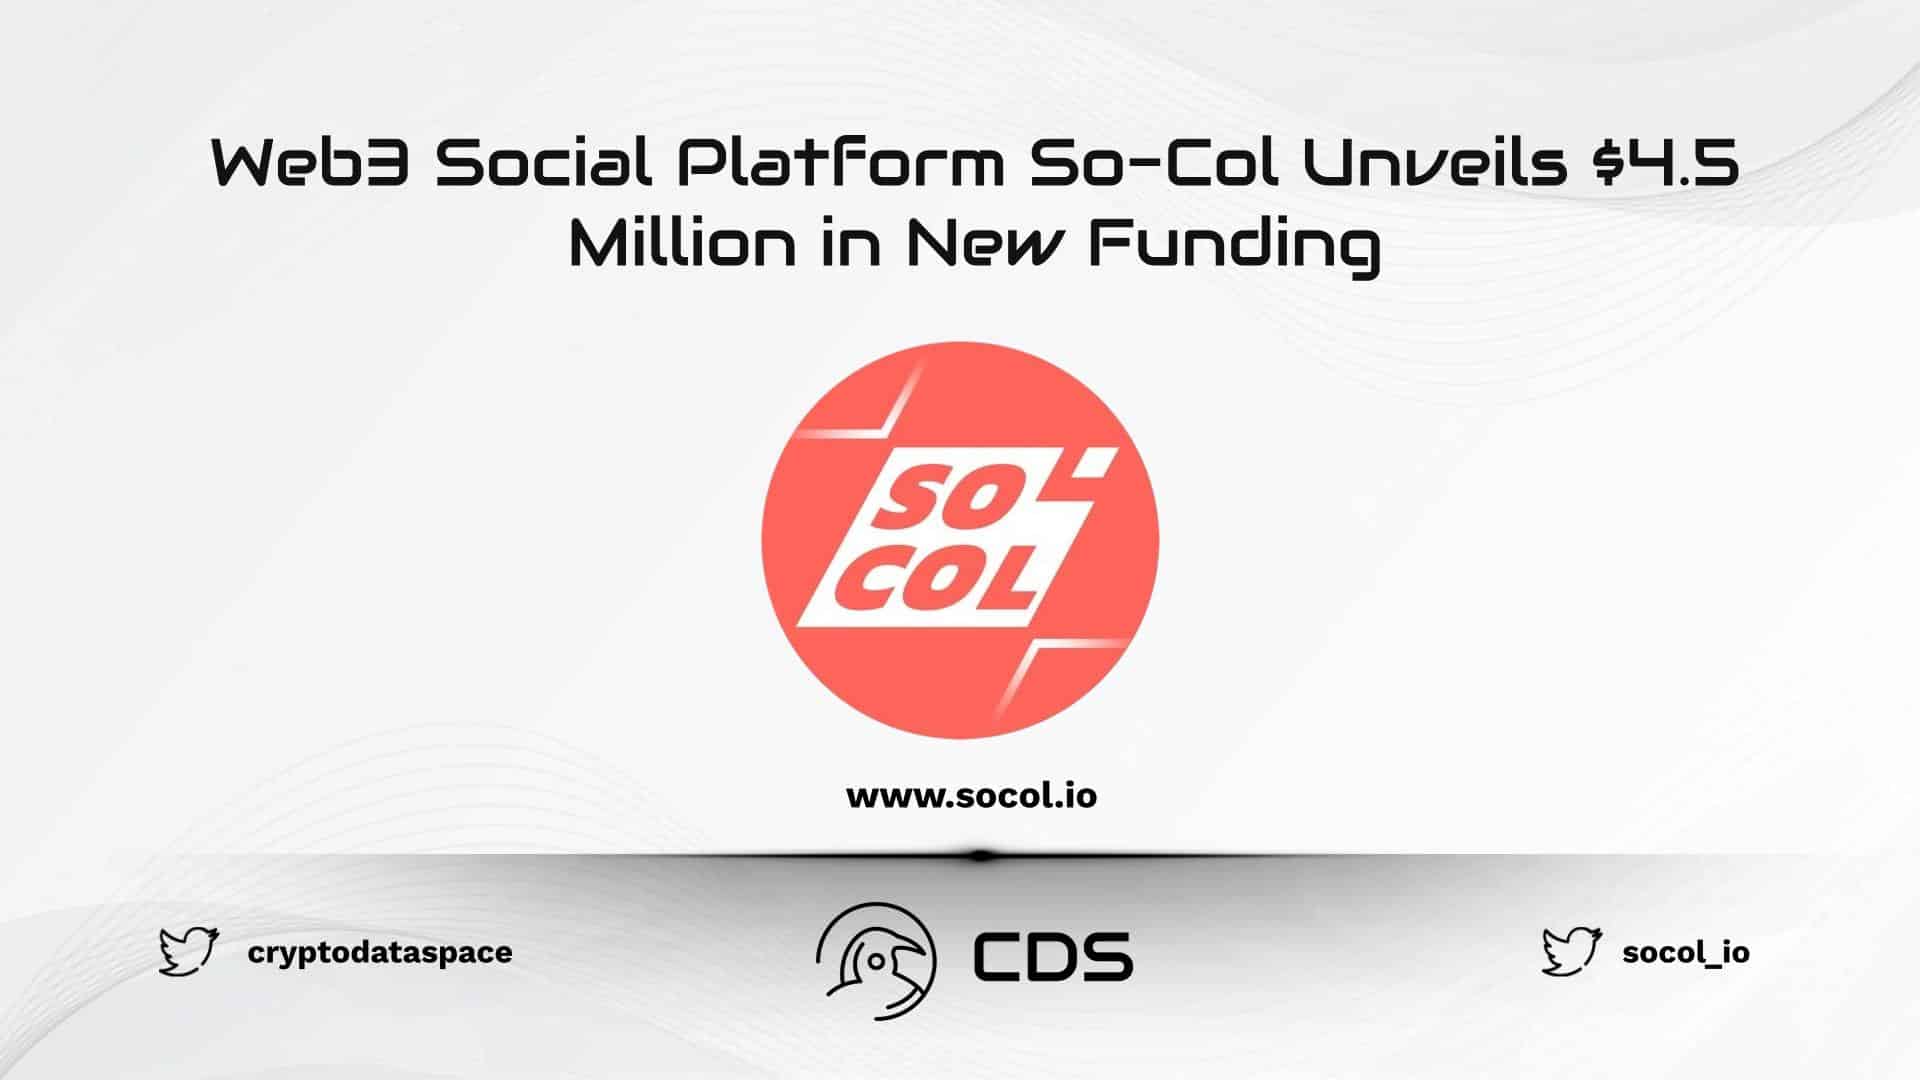 Web3 Social Platform So-Col Unveils $4.5 Million in New Funding